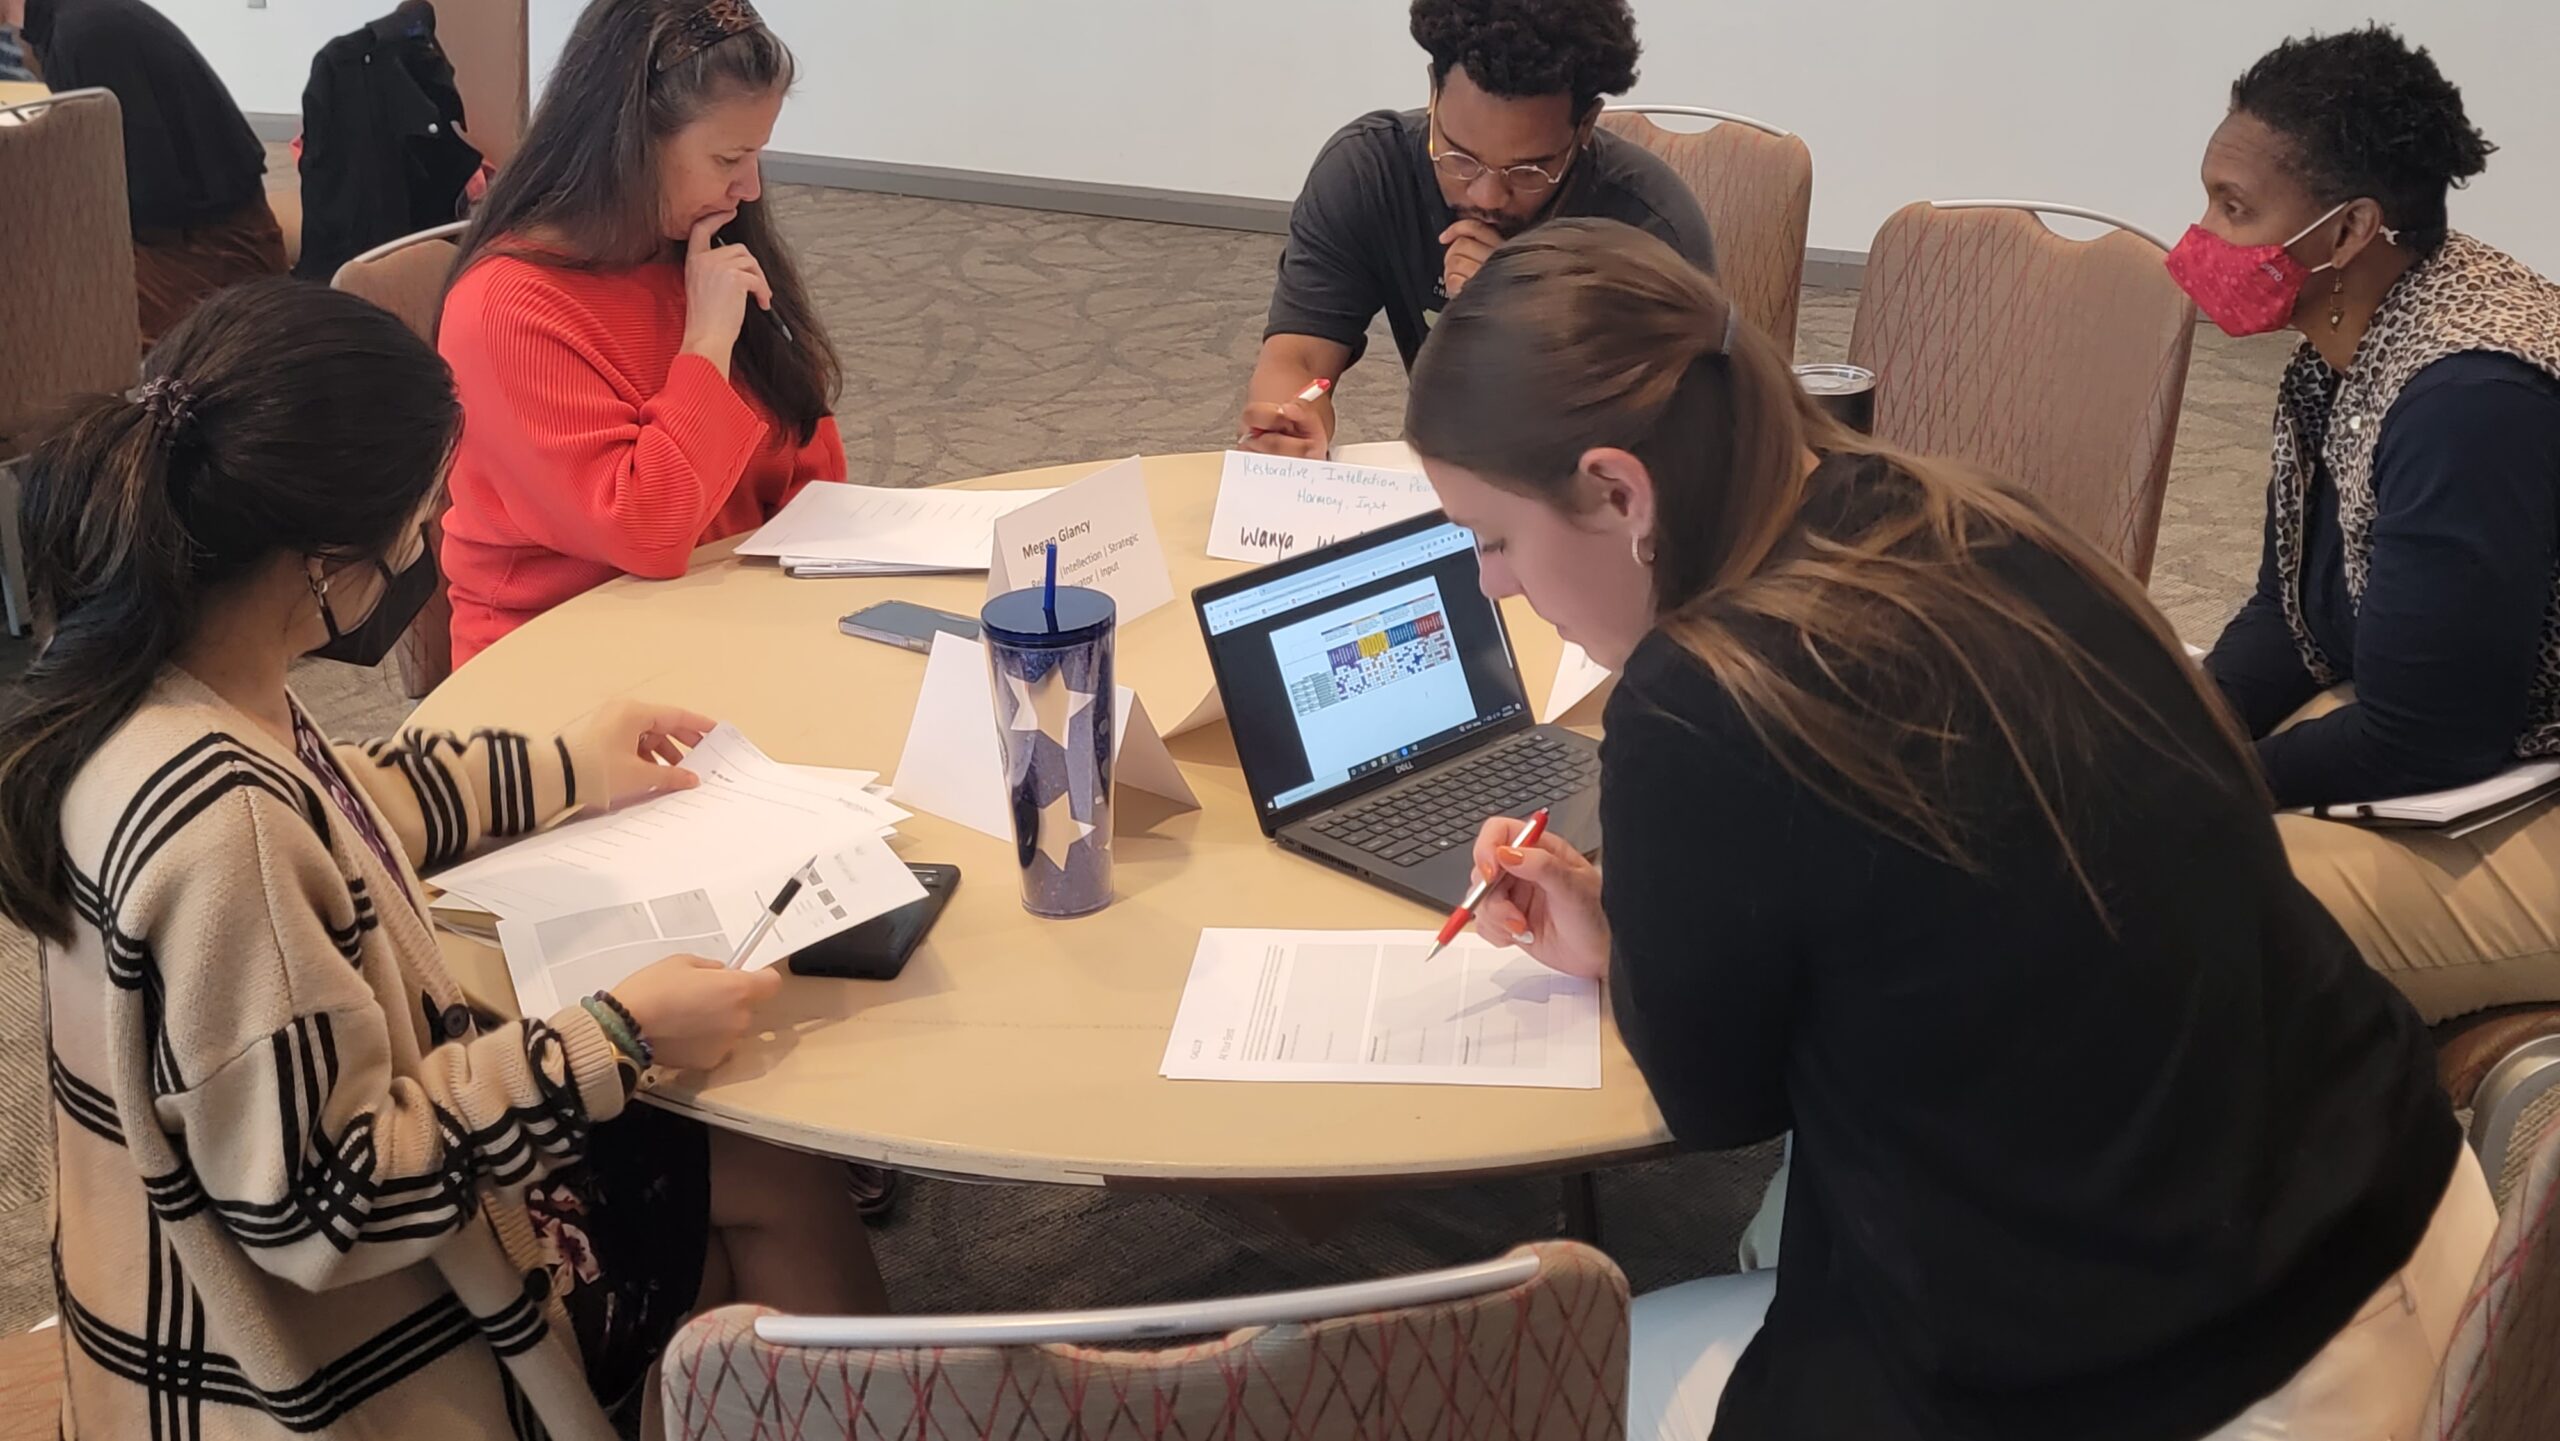 A group of people sit around a table and work on an assignment